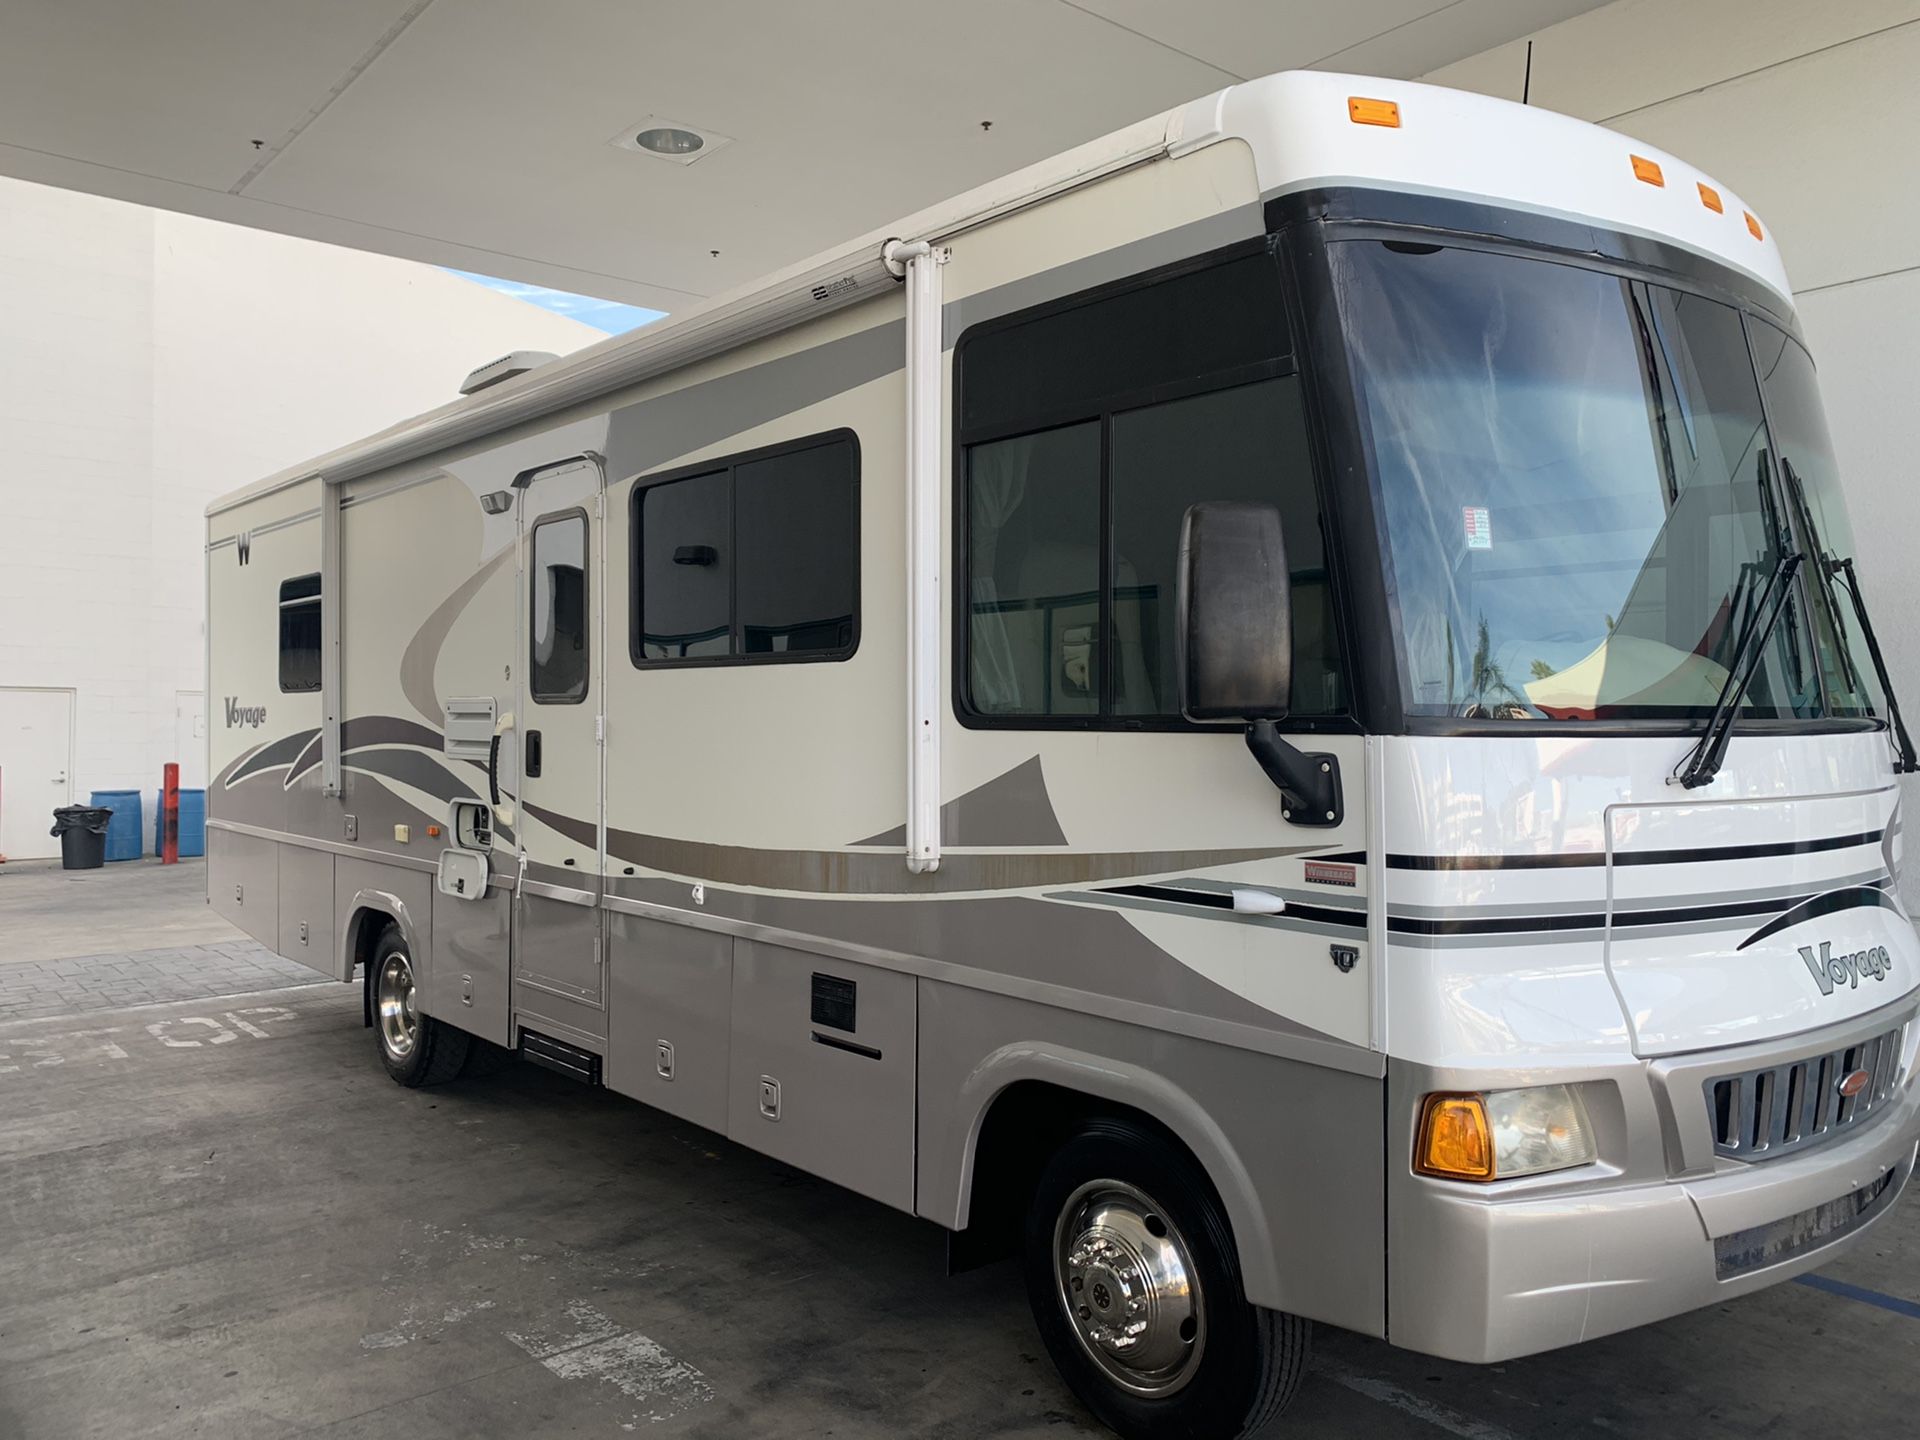 Rare find! 2006 Itasca Voyager 31w